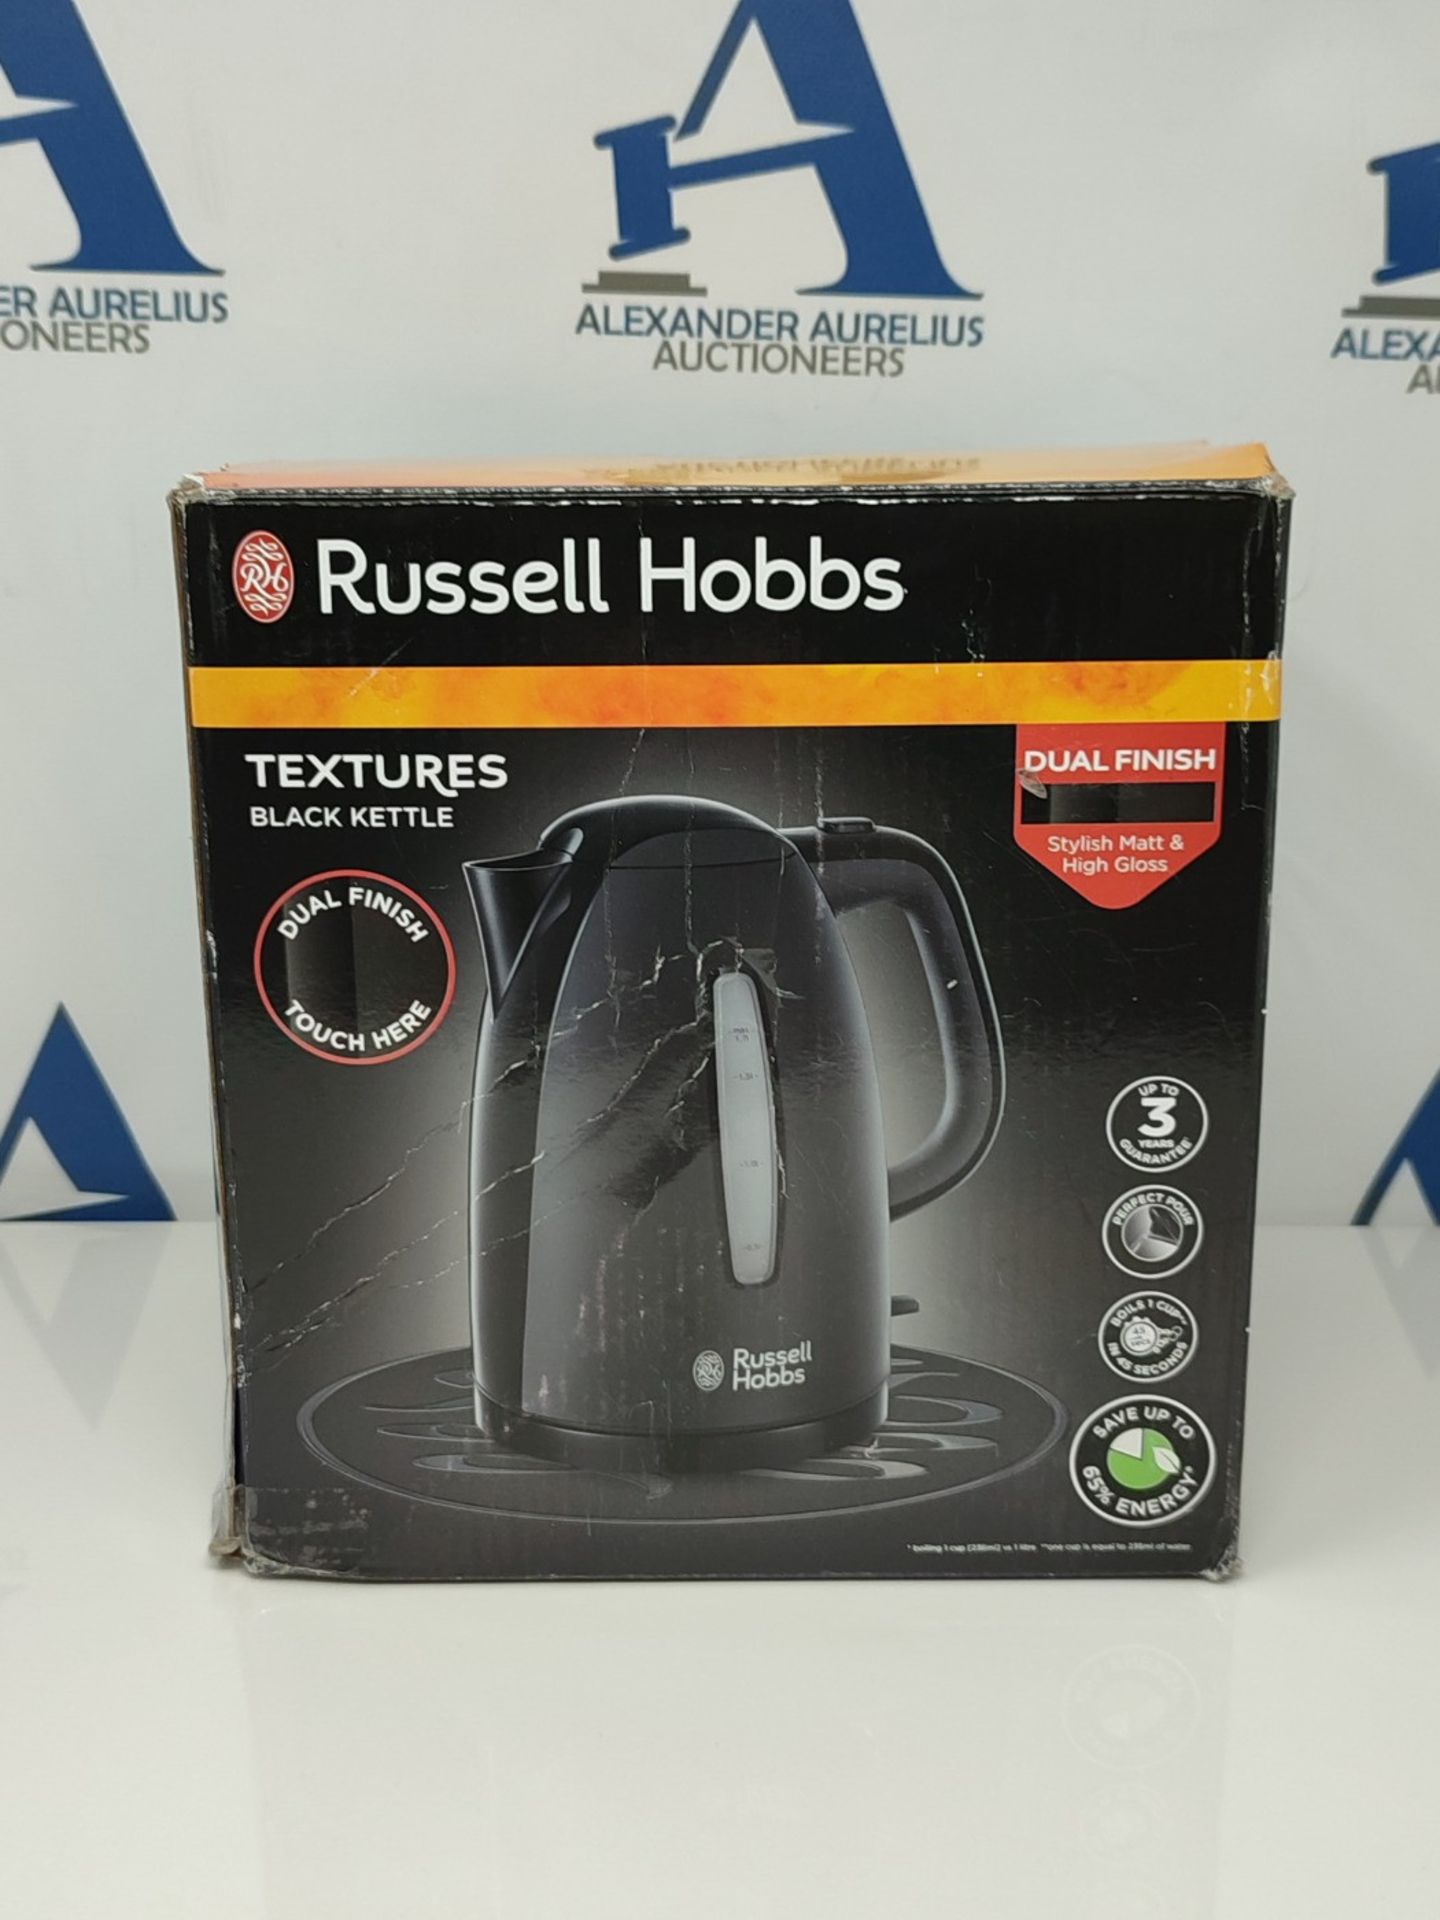 Russell Hobbs Textures Plastic Kettle 21271, 1.7 L, 3000 W - Black - Image 2 of 3